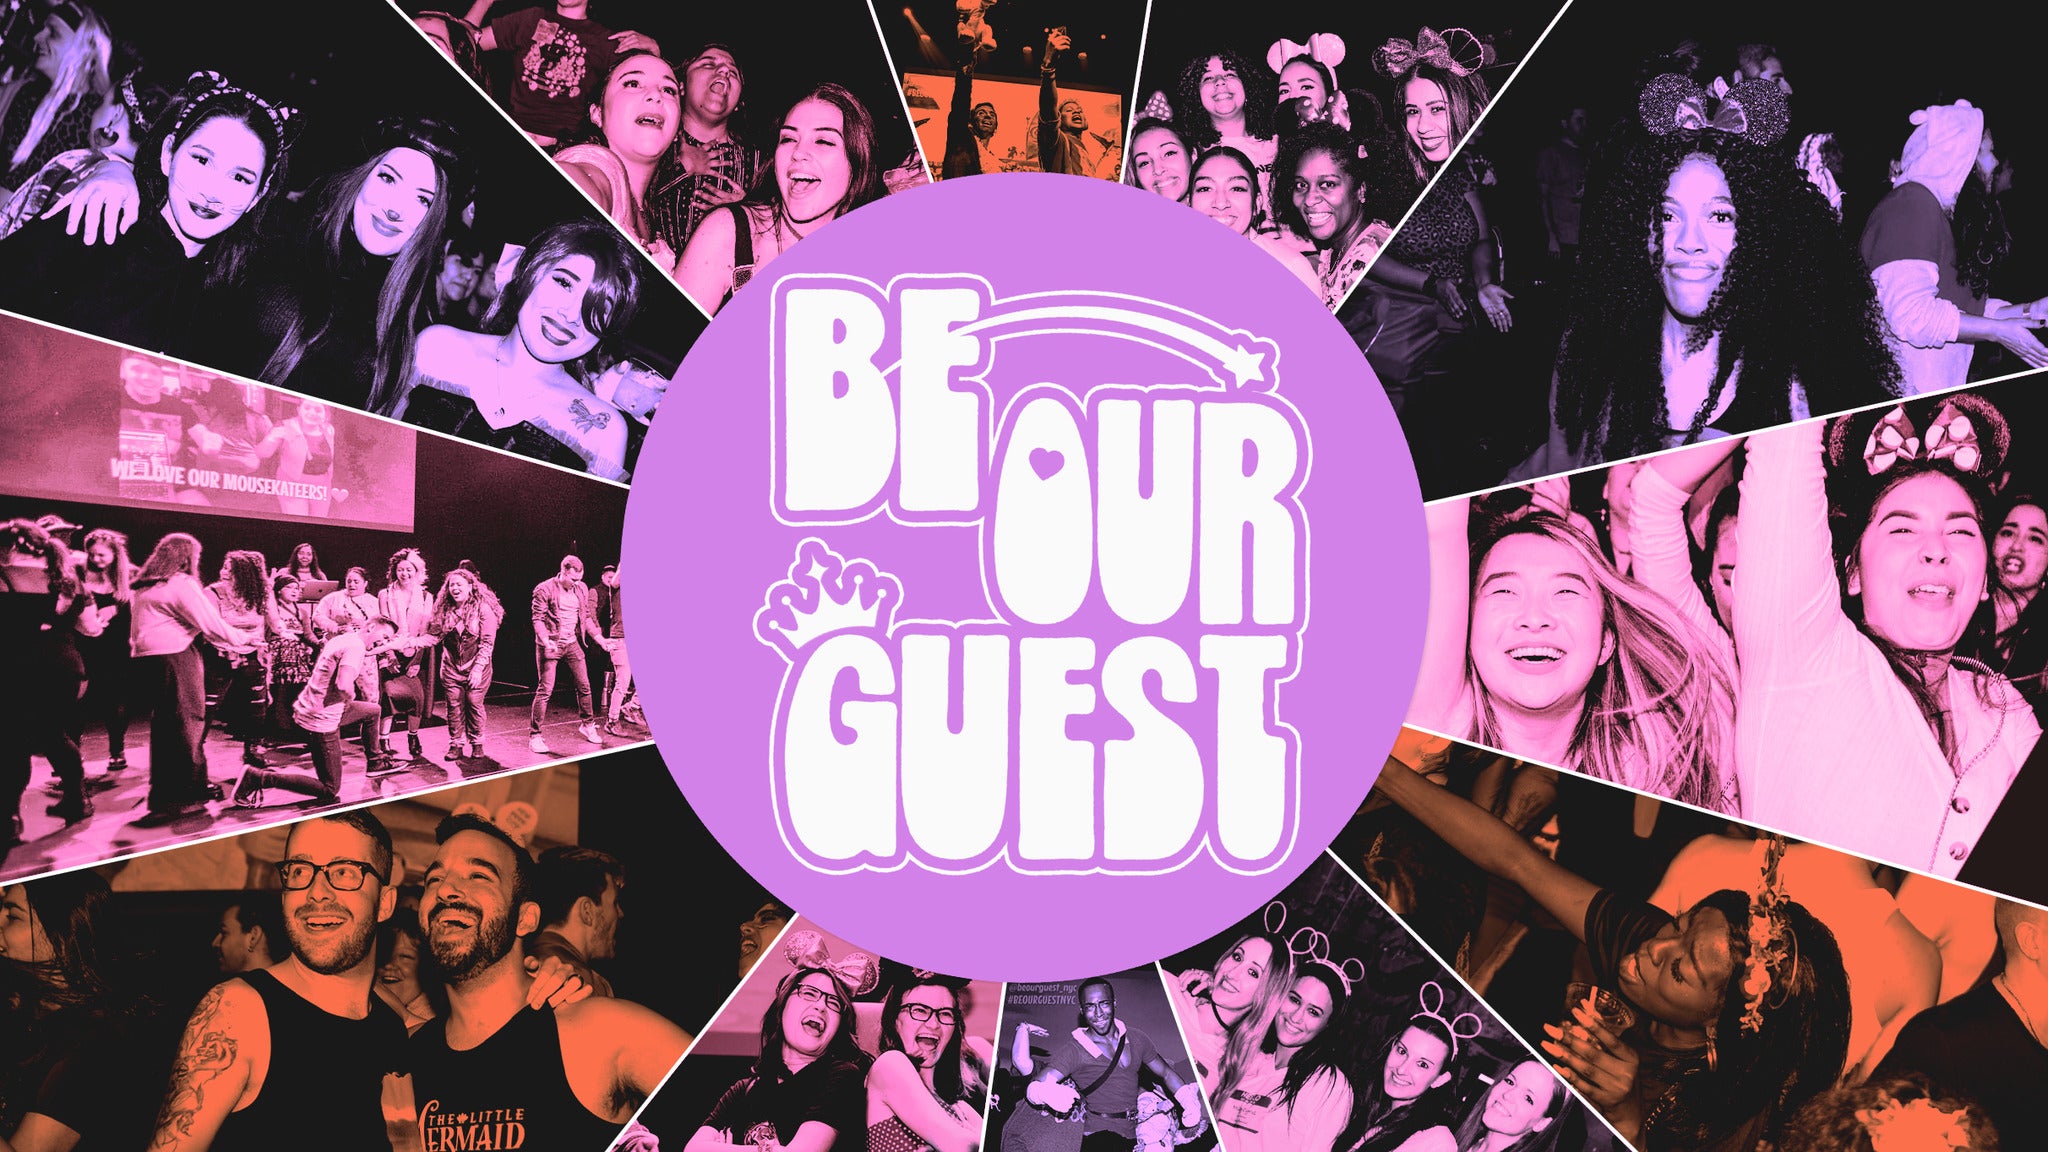 Be Our Guest: A Disney DJ Night - 18+ Event presale password for show tickets in Dallas, TX (The Echo Lounge & Music Hall)